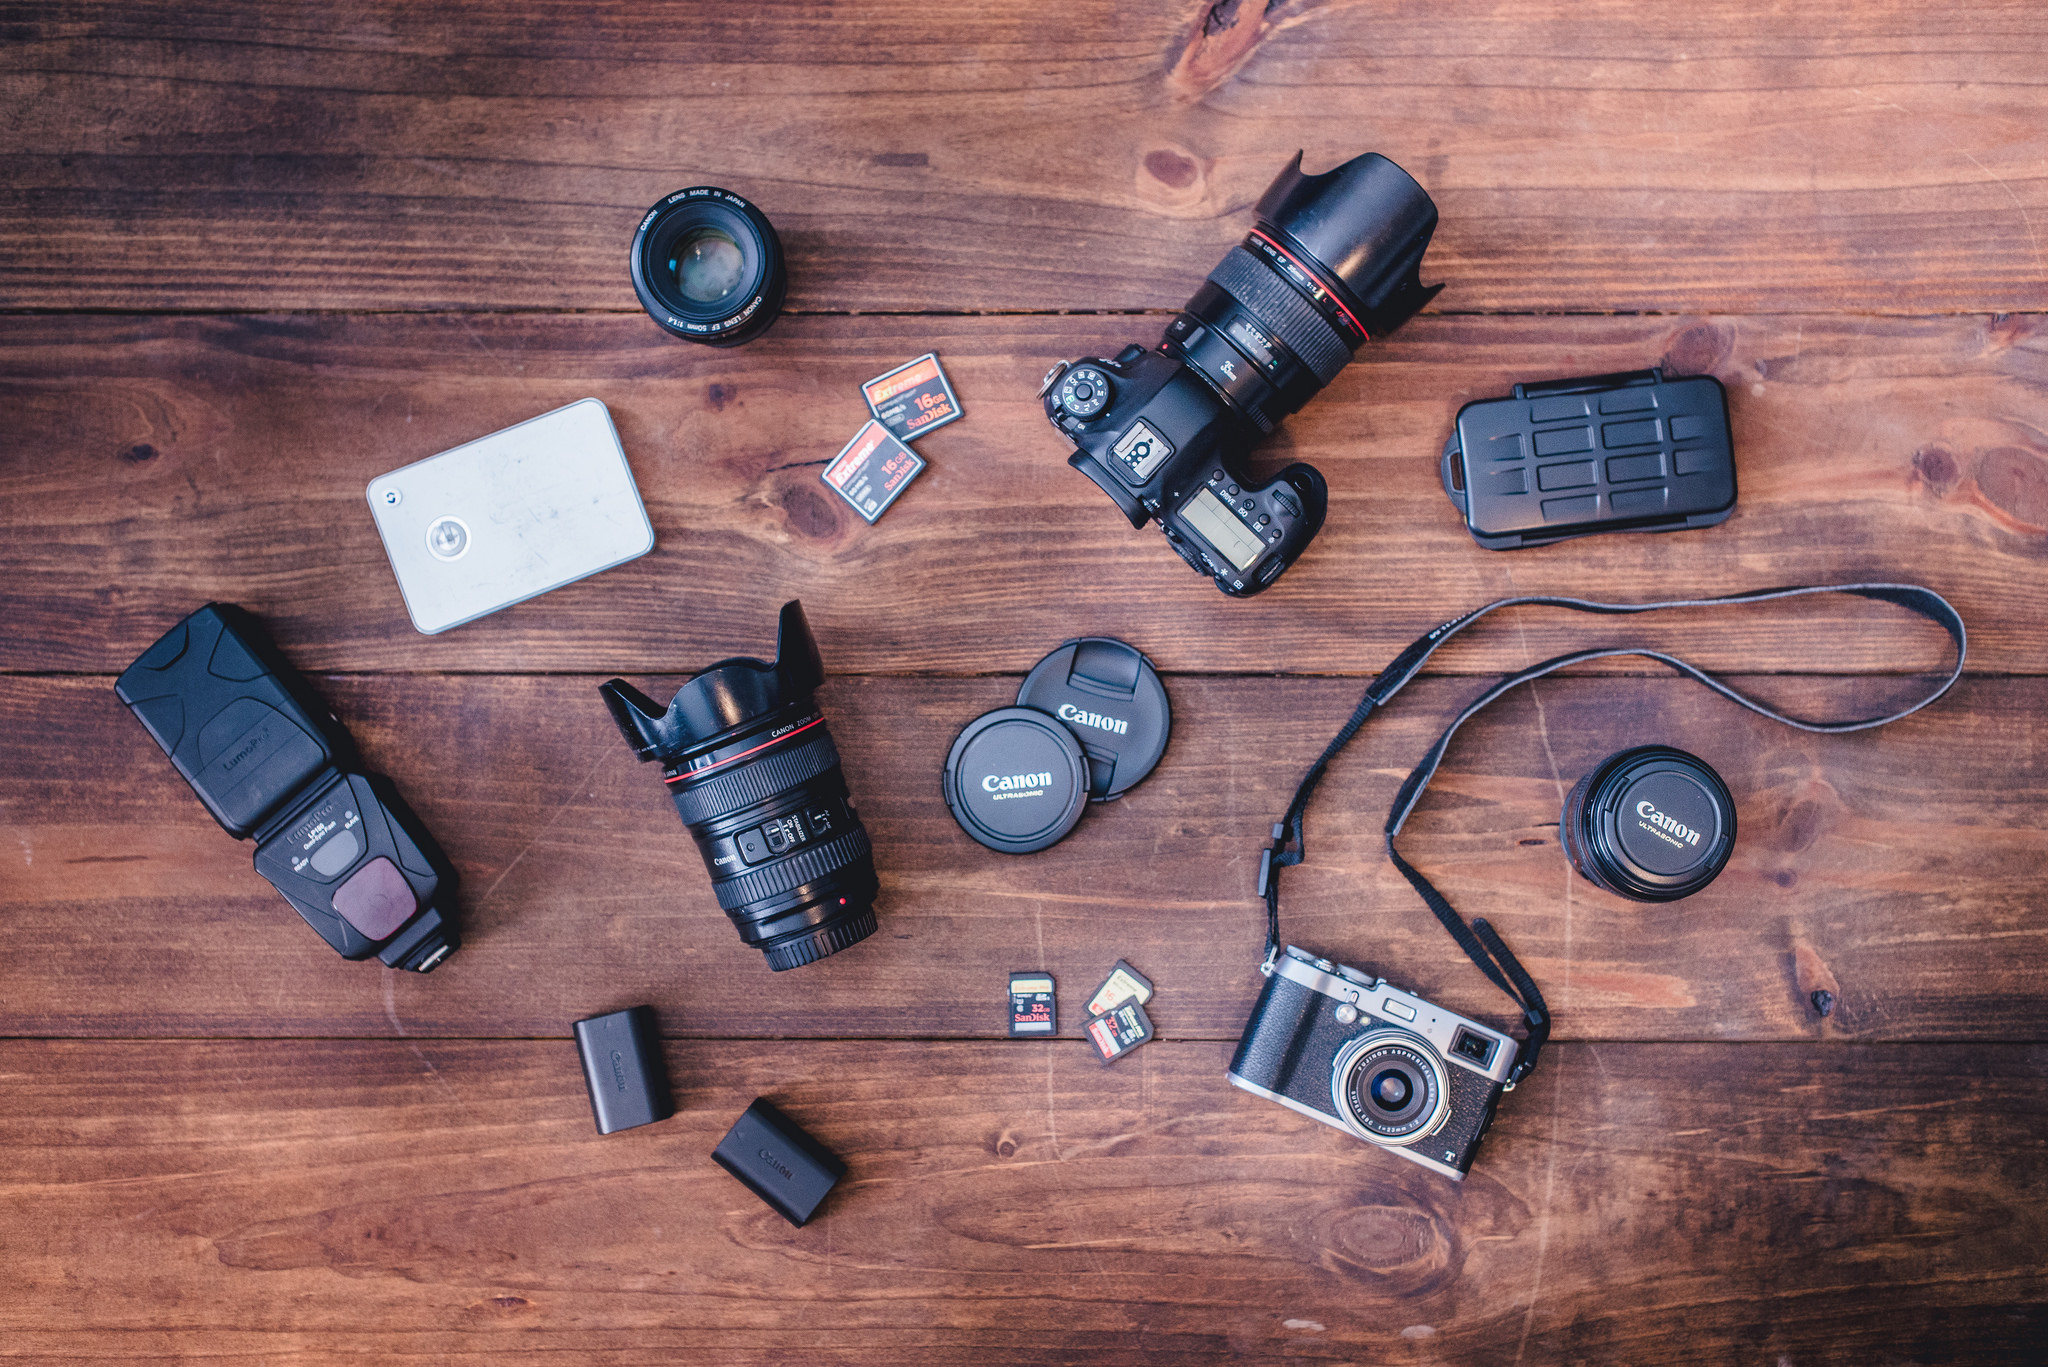 A variety of cameras, lenses, batteries, flashes, and memory cards